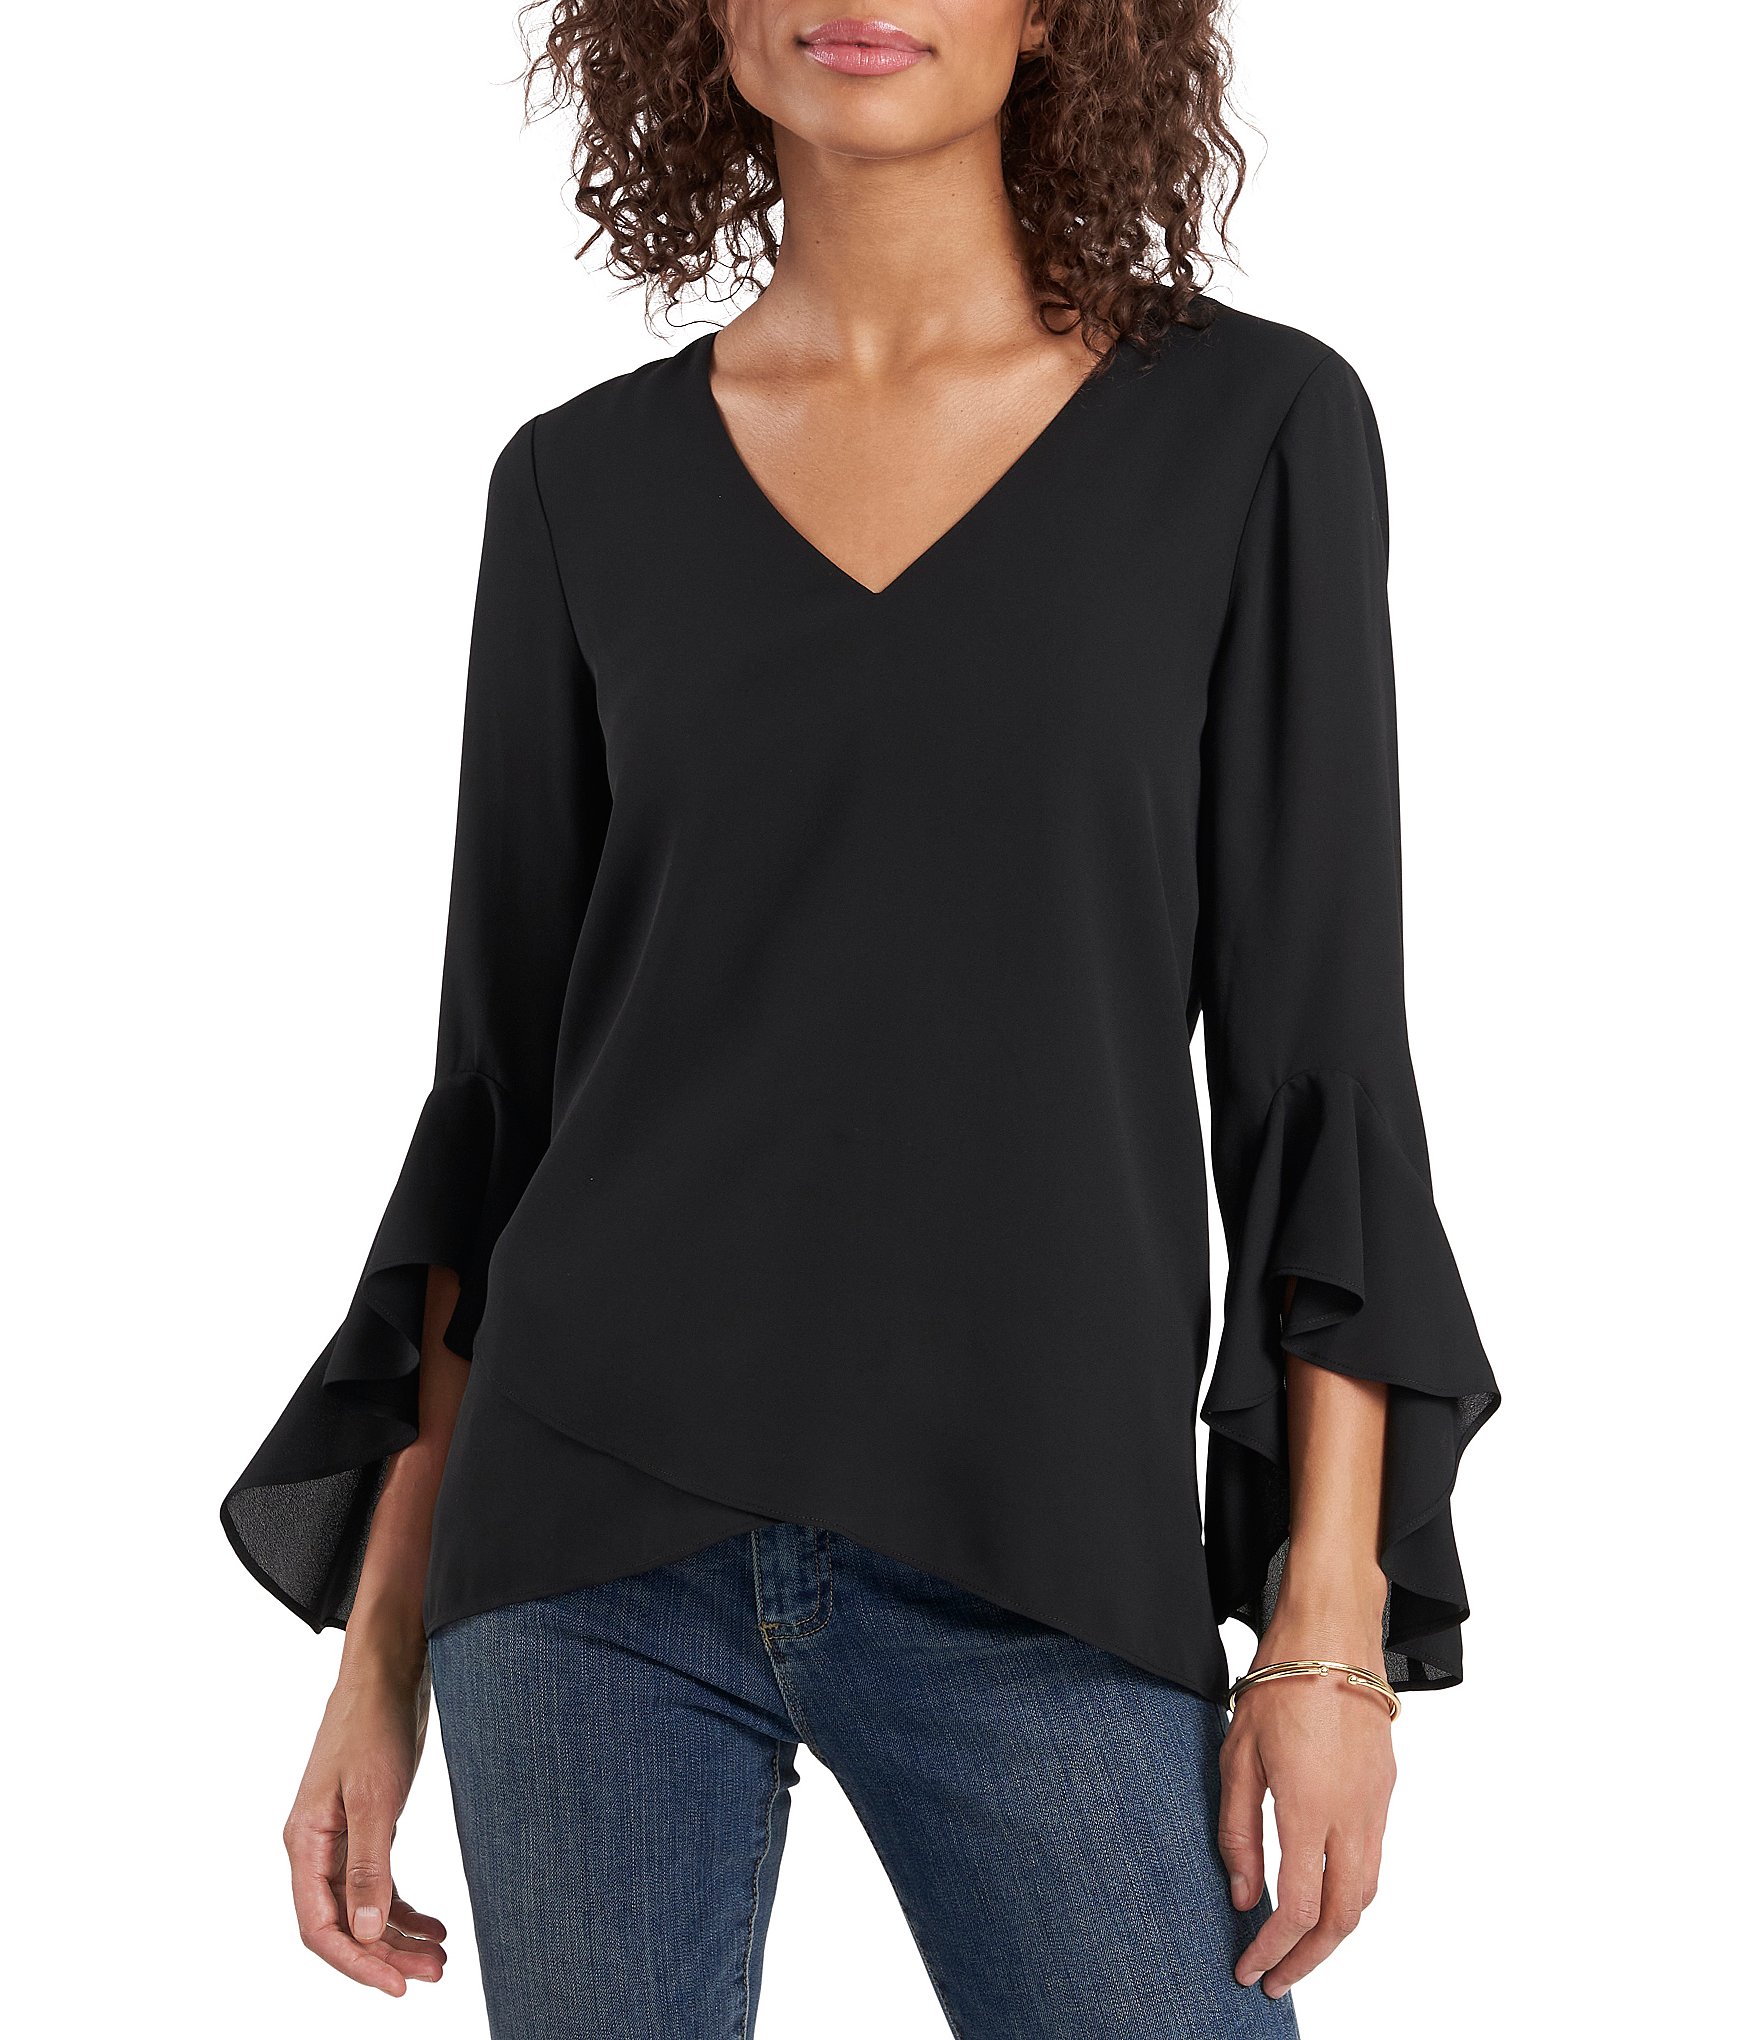 Spanx On Top and in Control Elbow Length Scoop Neck Top, Black UK Size XL